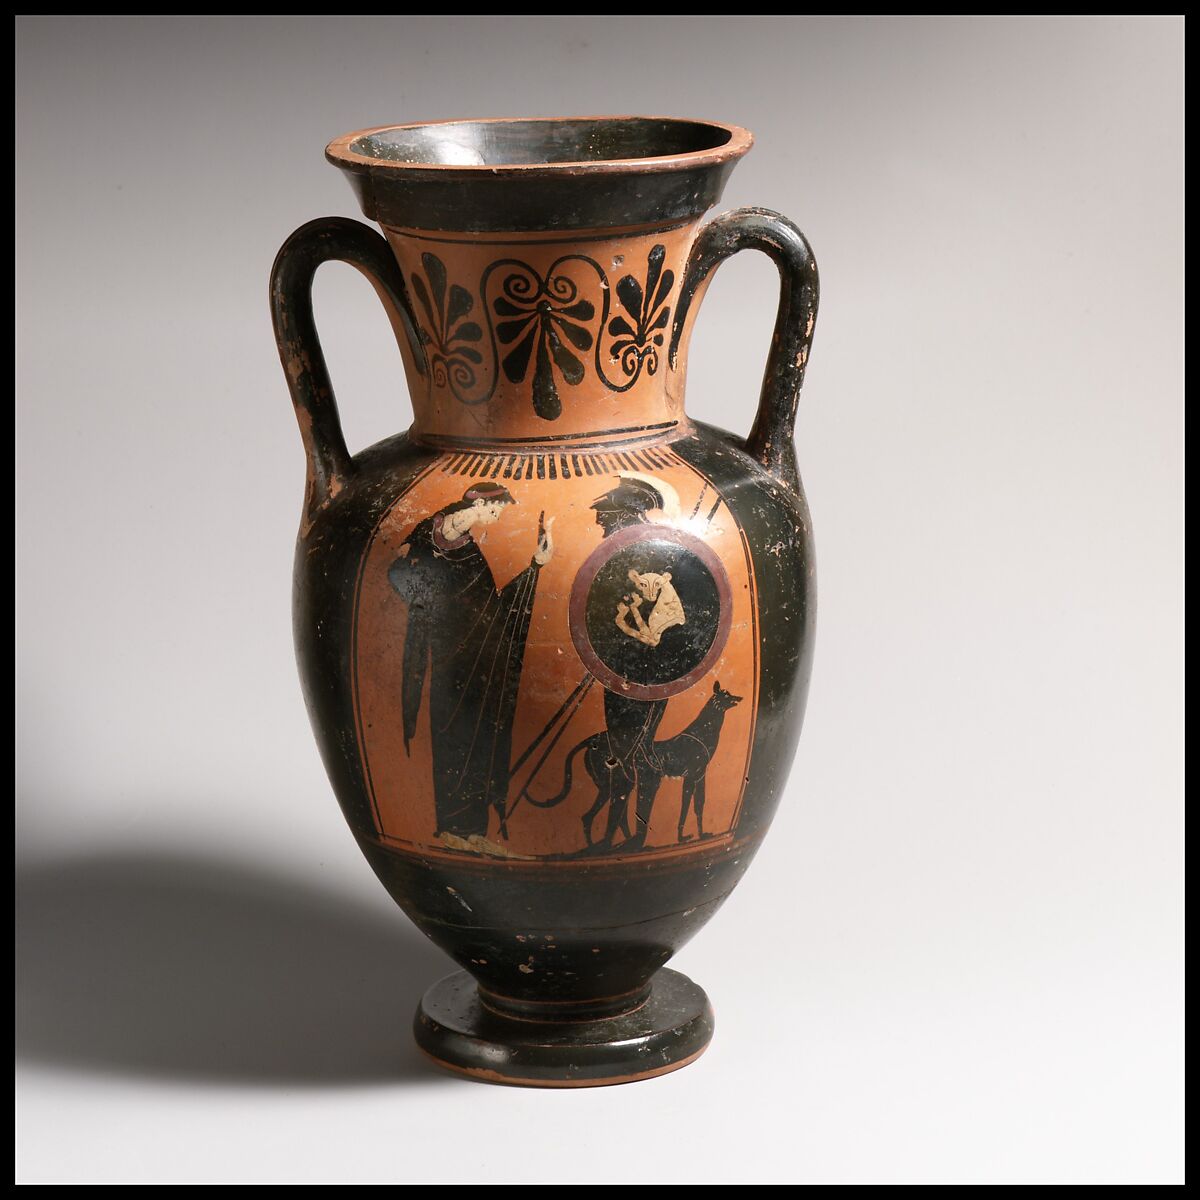 Neck-amphora, Attributed to the Doubleens Class, Terracotta, Greek, Attic 